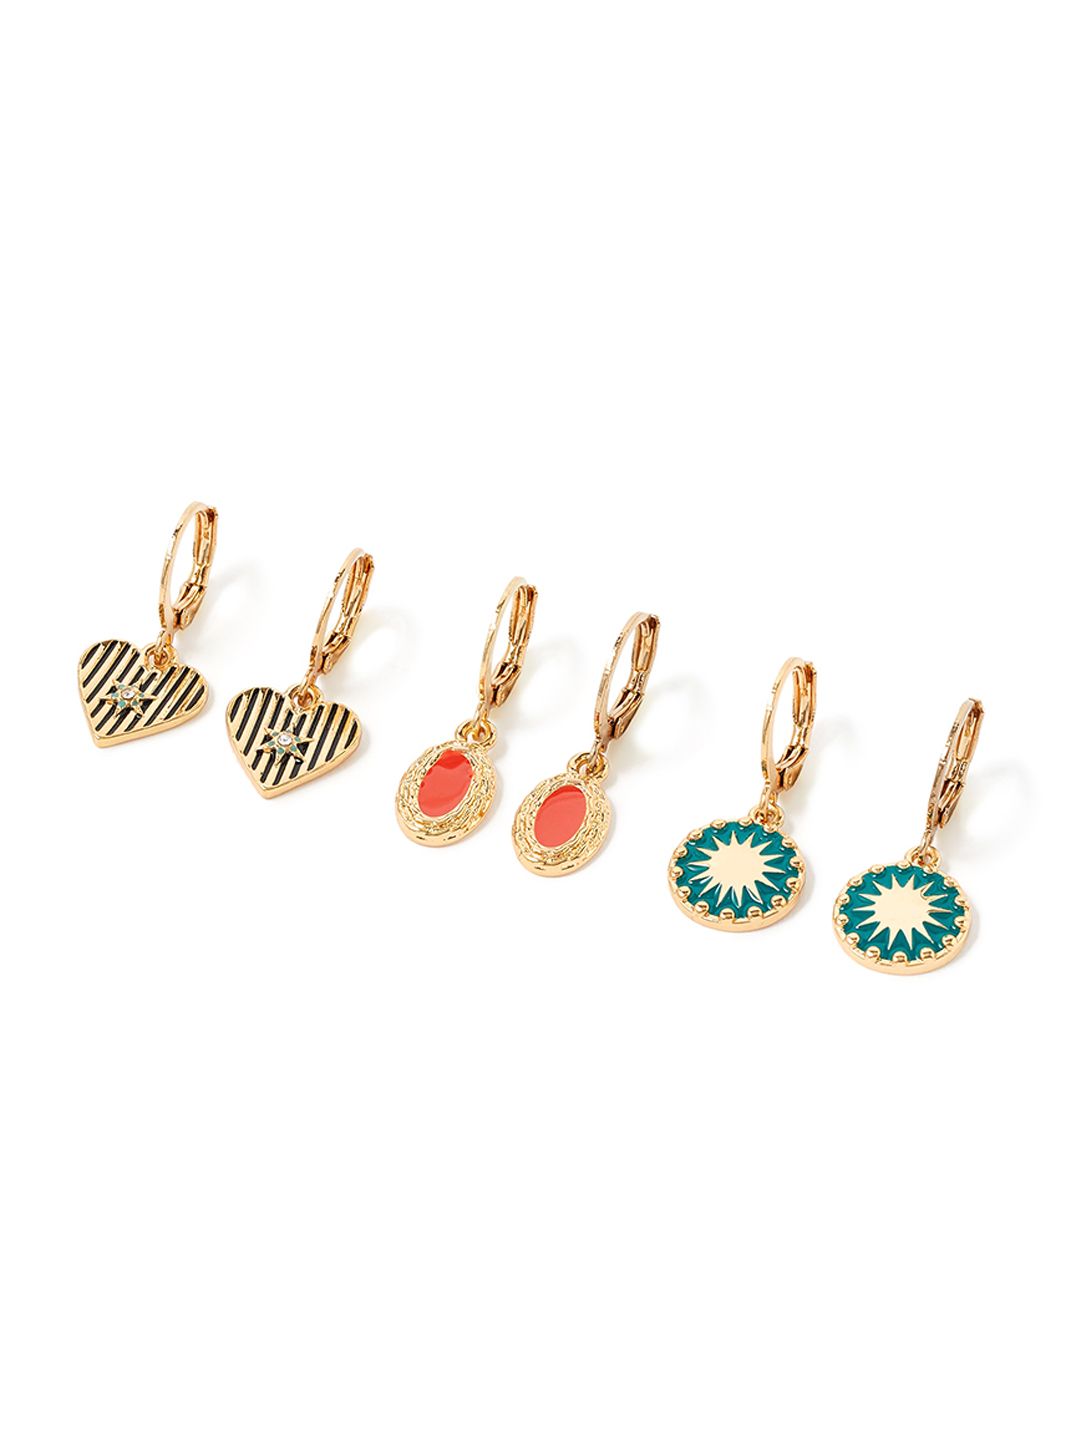 Accessorize Gold-Plated Set of 3 Contemporary Drop Earrings Price in India